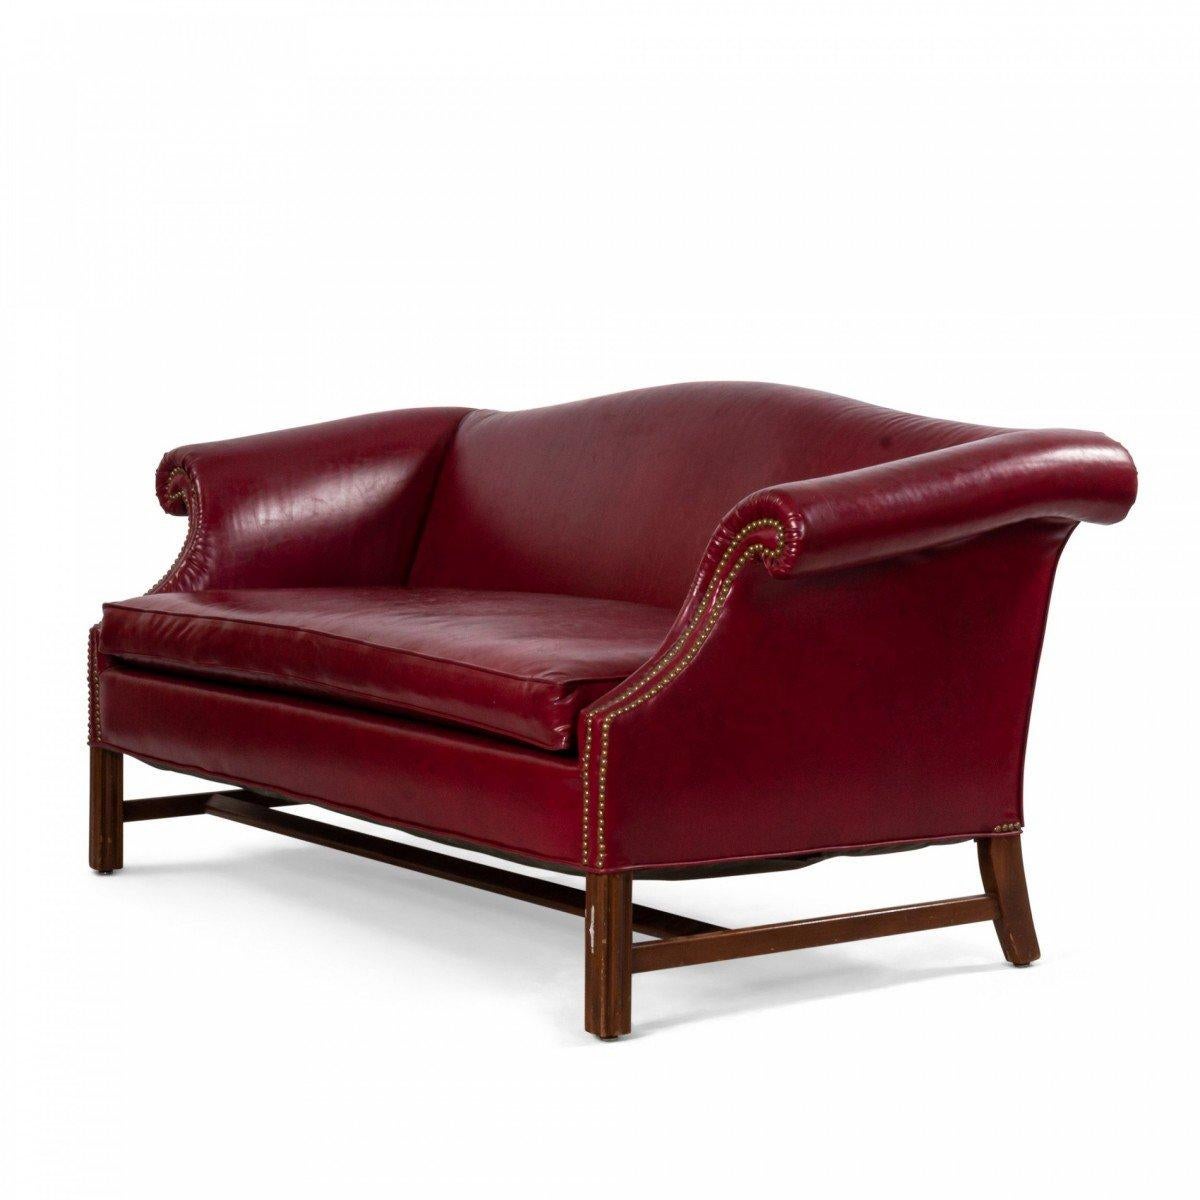 Vintage English Georgian style red leather camelback Chesterfield sofa with outscrolled arms with brass rivet trim and a red leather seat cushion supported on straight reeded legs connected by a center stretcher.